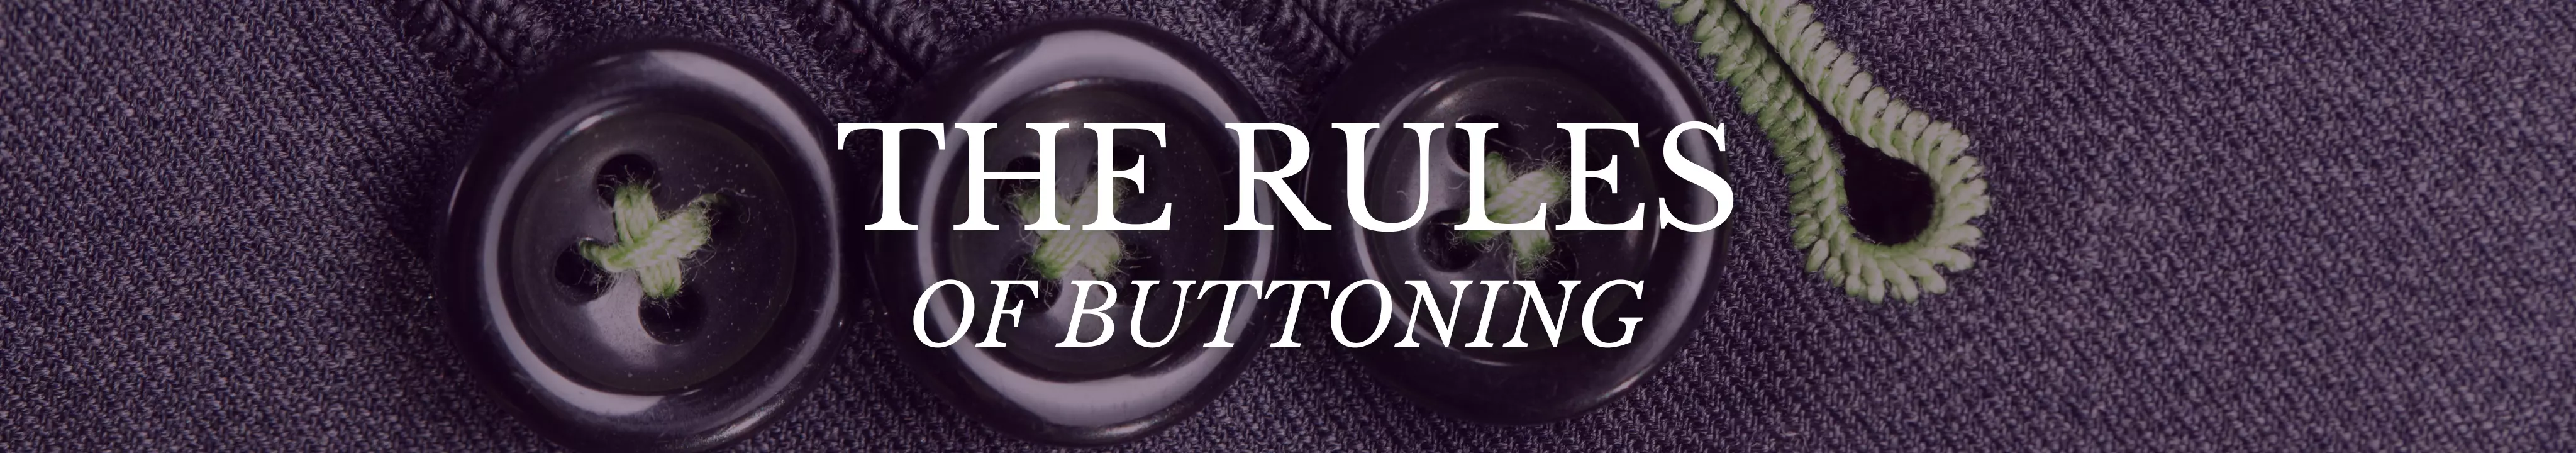 The Rules of Buttoning 